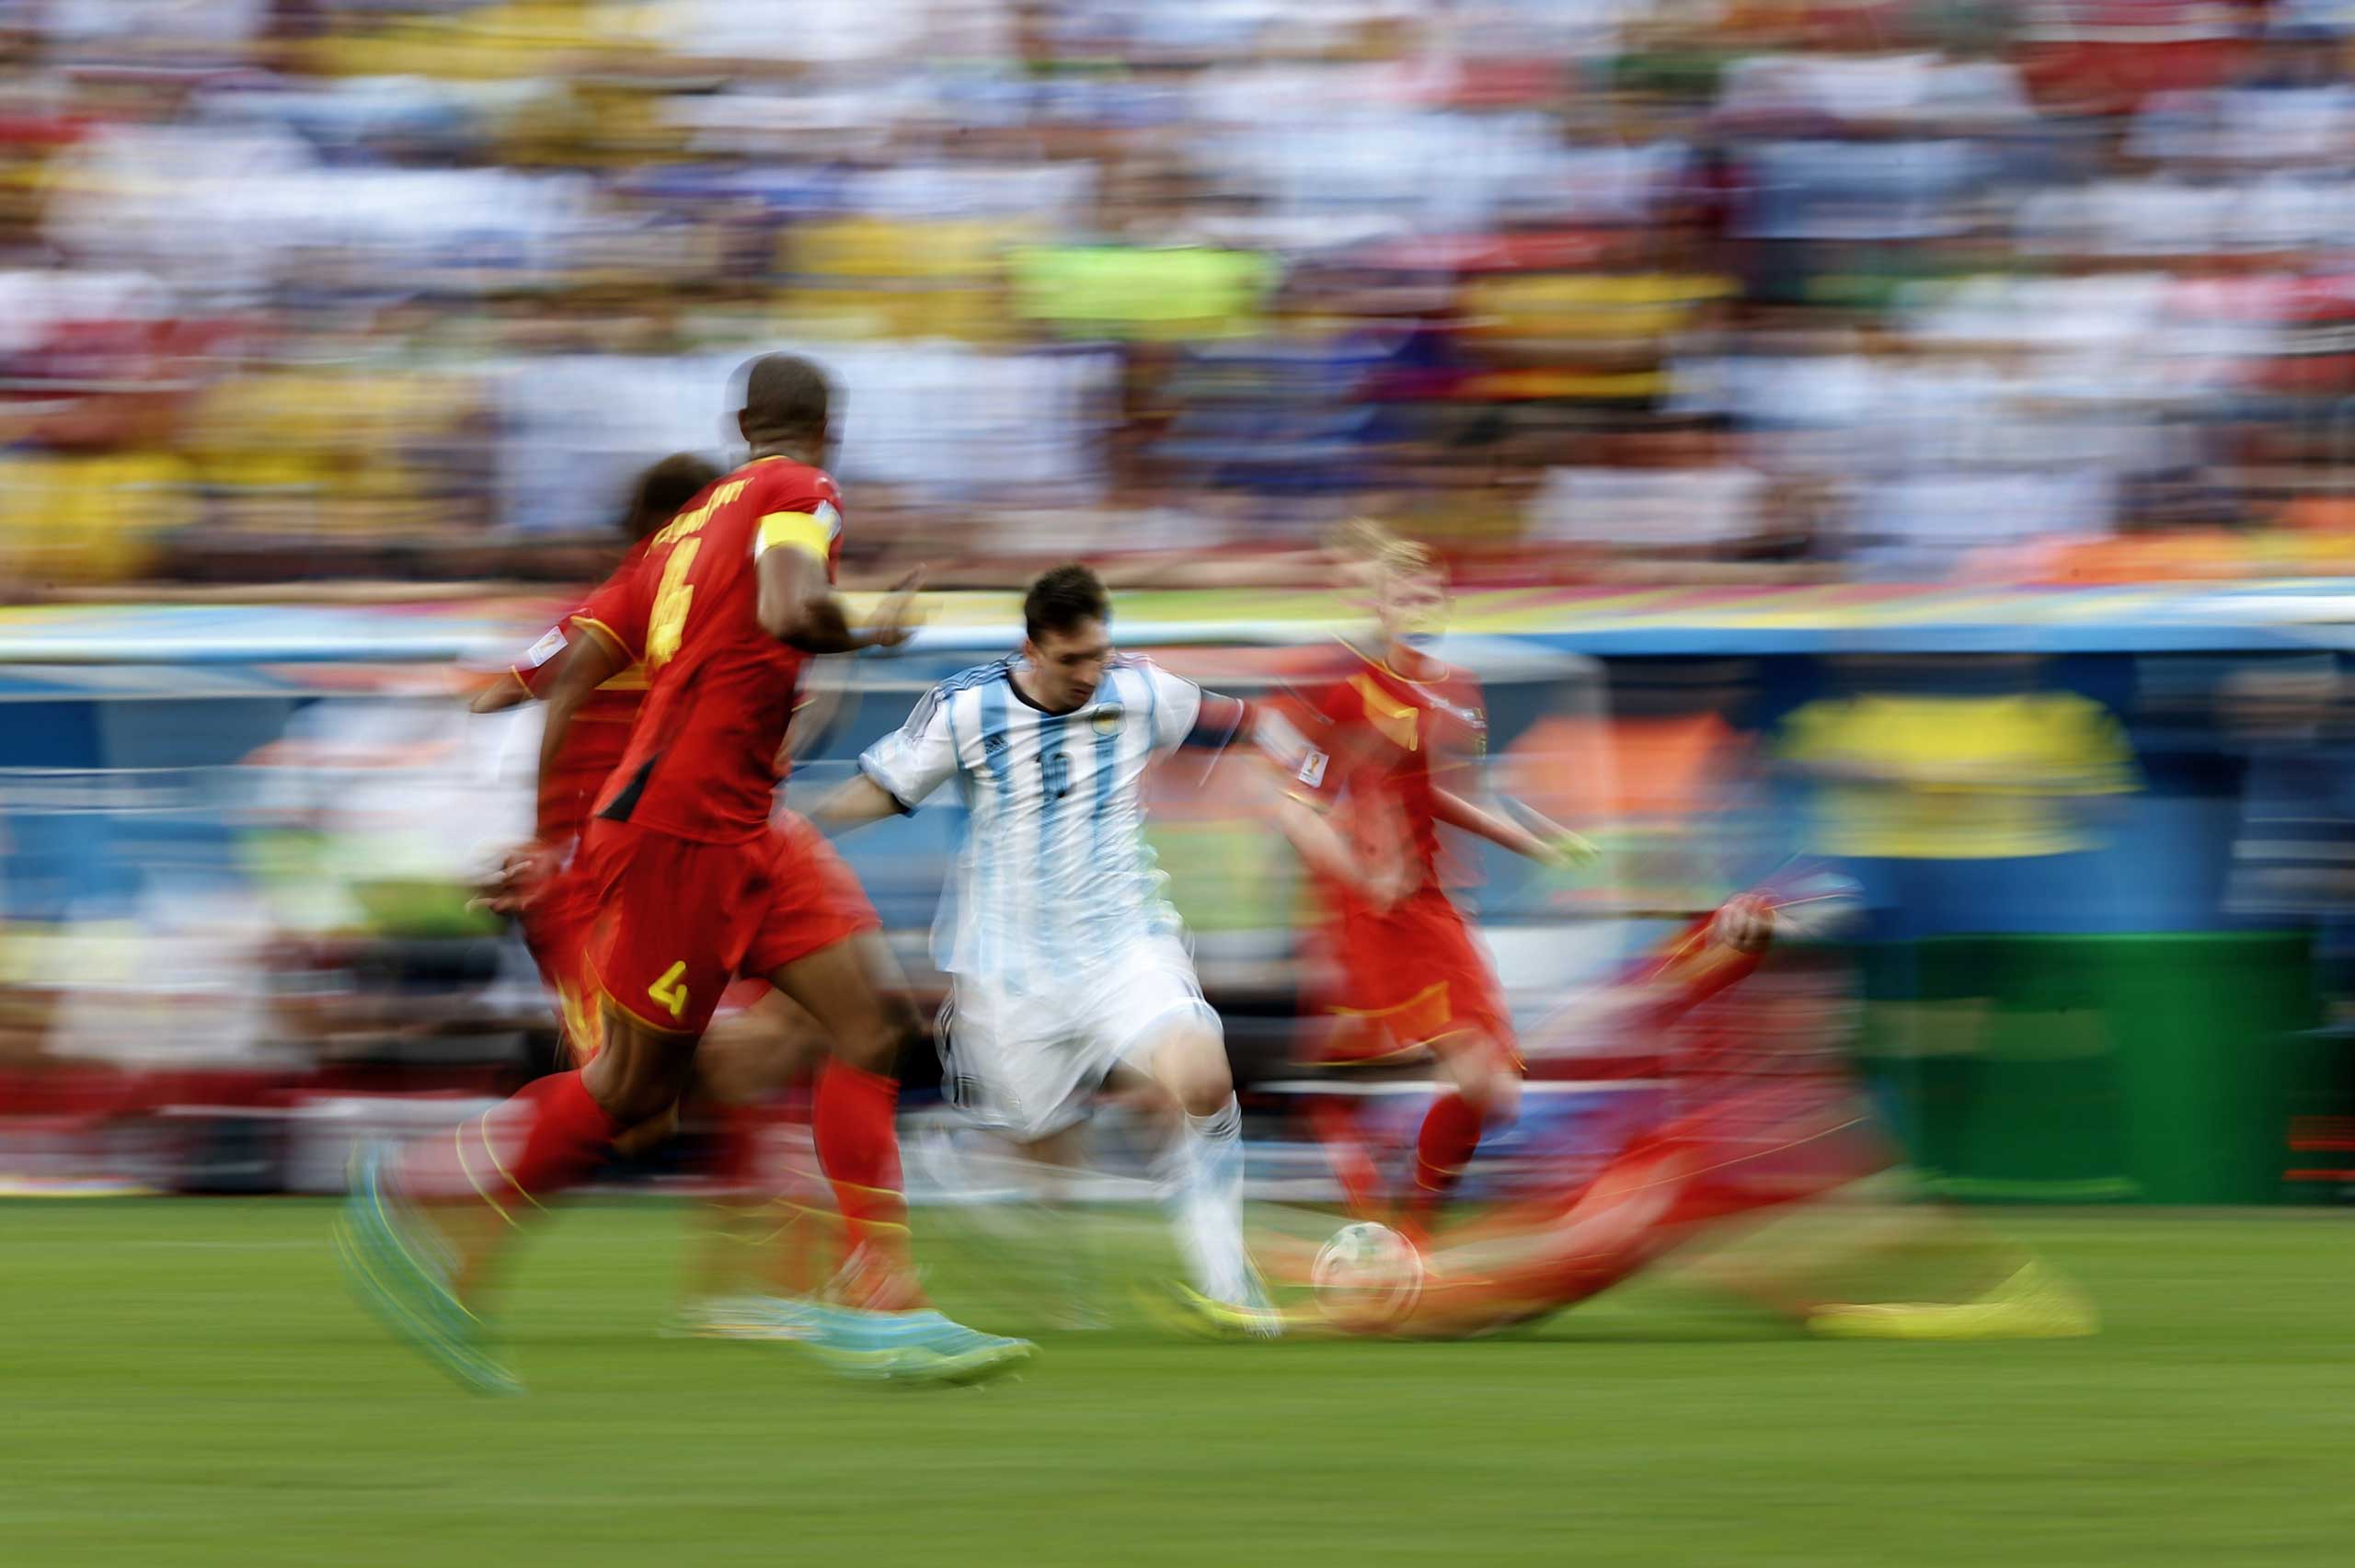 Argentina's forward and captain Lionel Messi (C) vies for the ball during a quarter-final football match between Argentina and Belgium at the Mane Garrincha National Stadium in Brasilia during the 2014 FIFA World Cup on July 5, 2014.